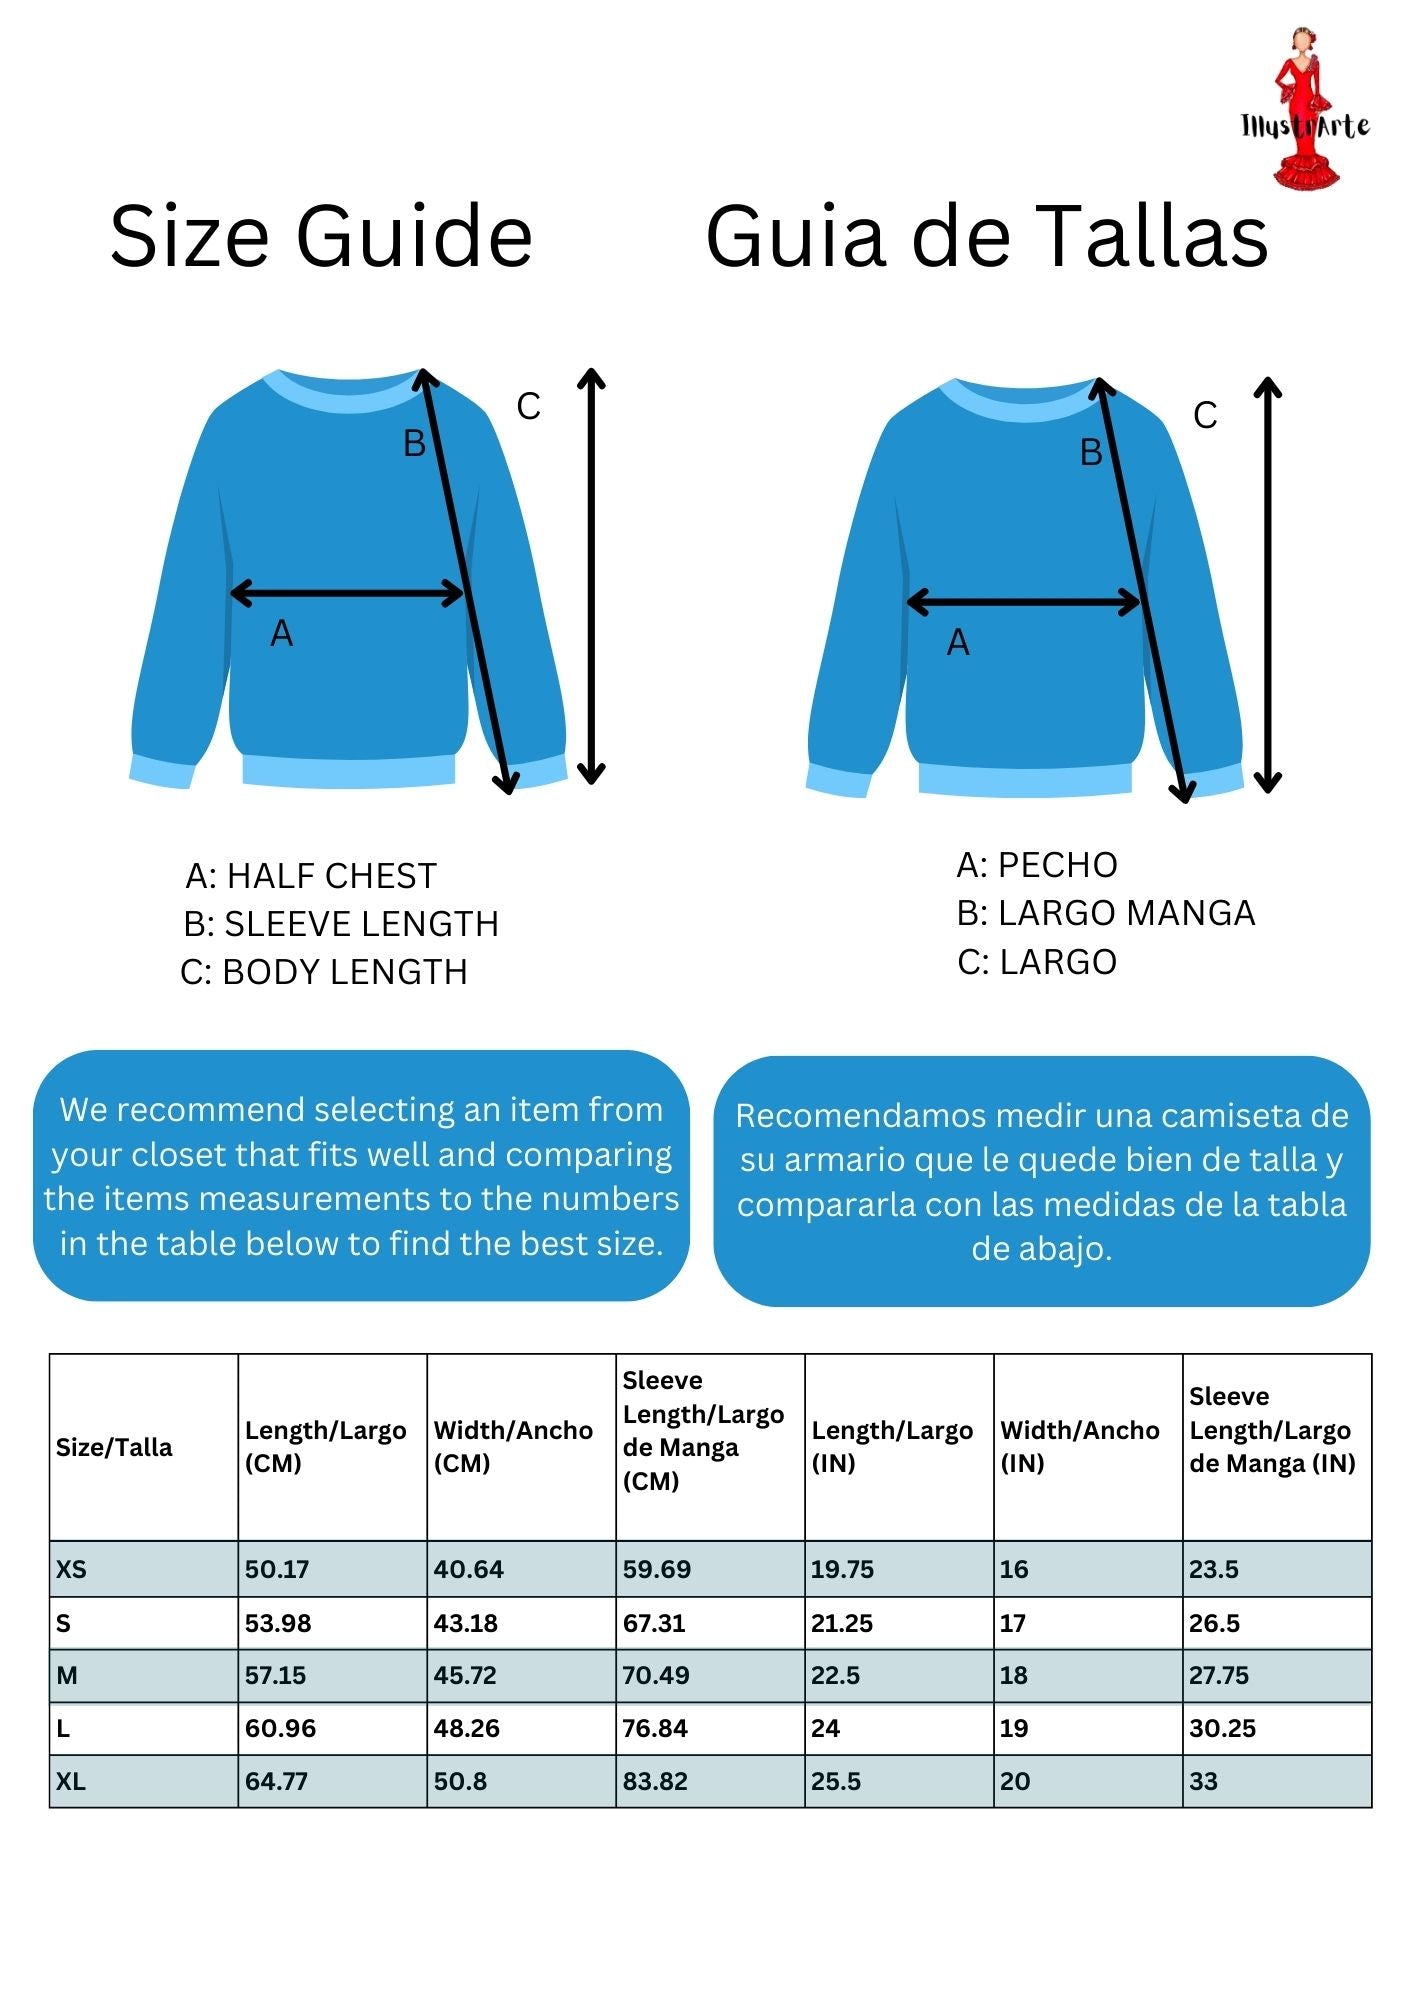 the size guide for a long sleeved t - shirt